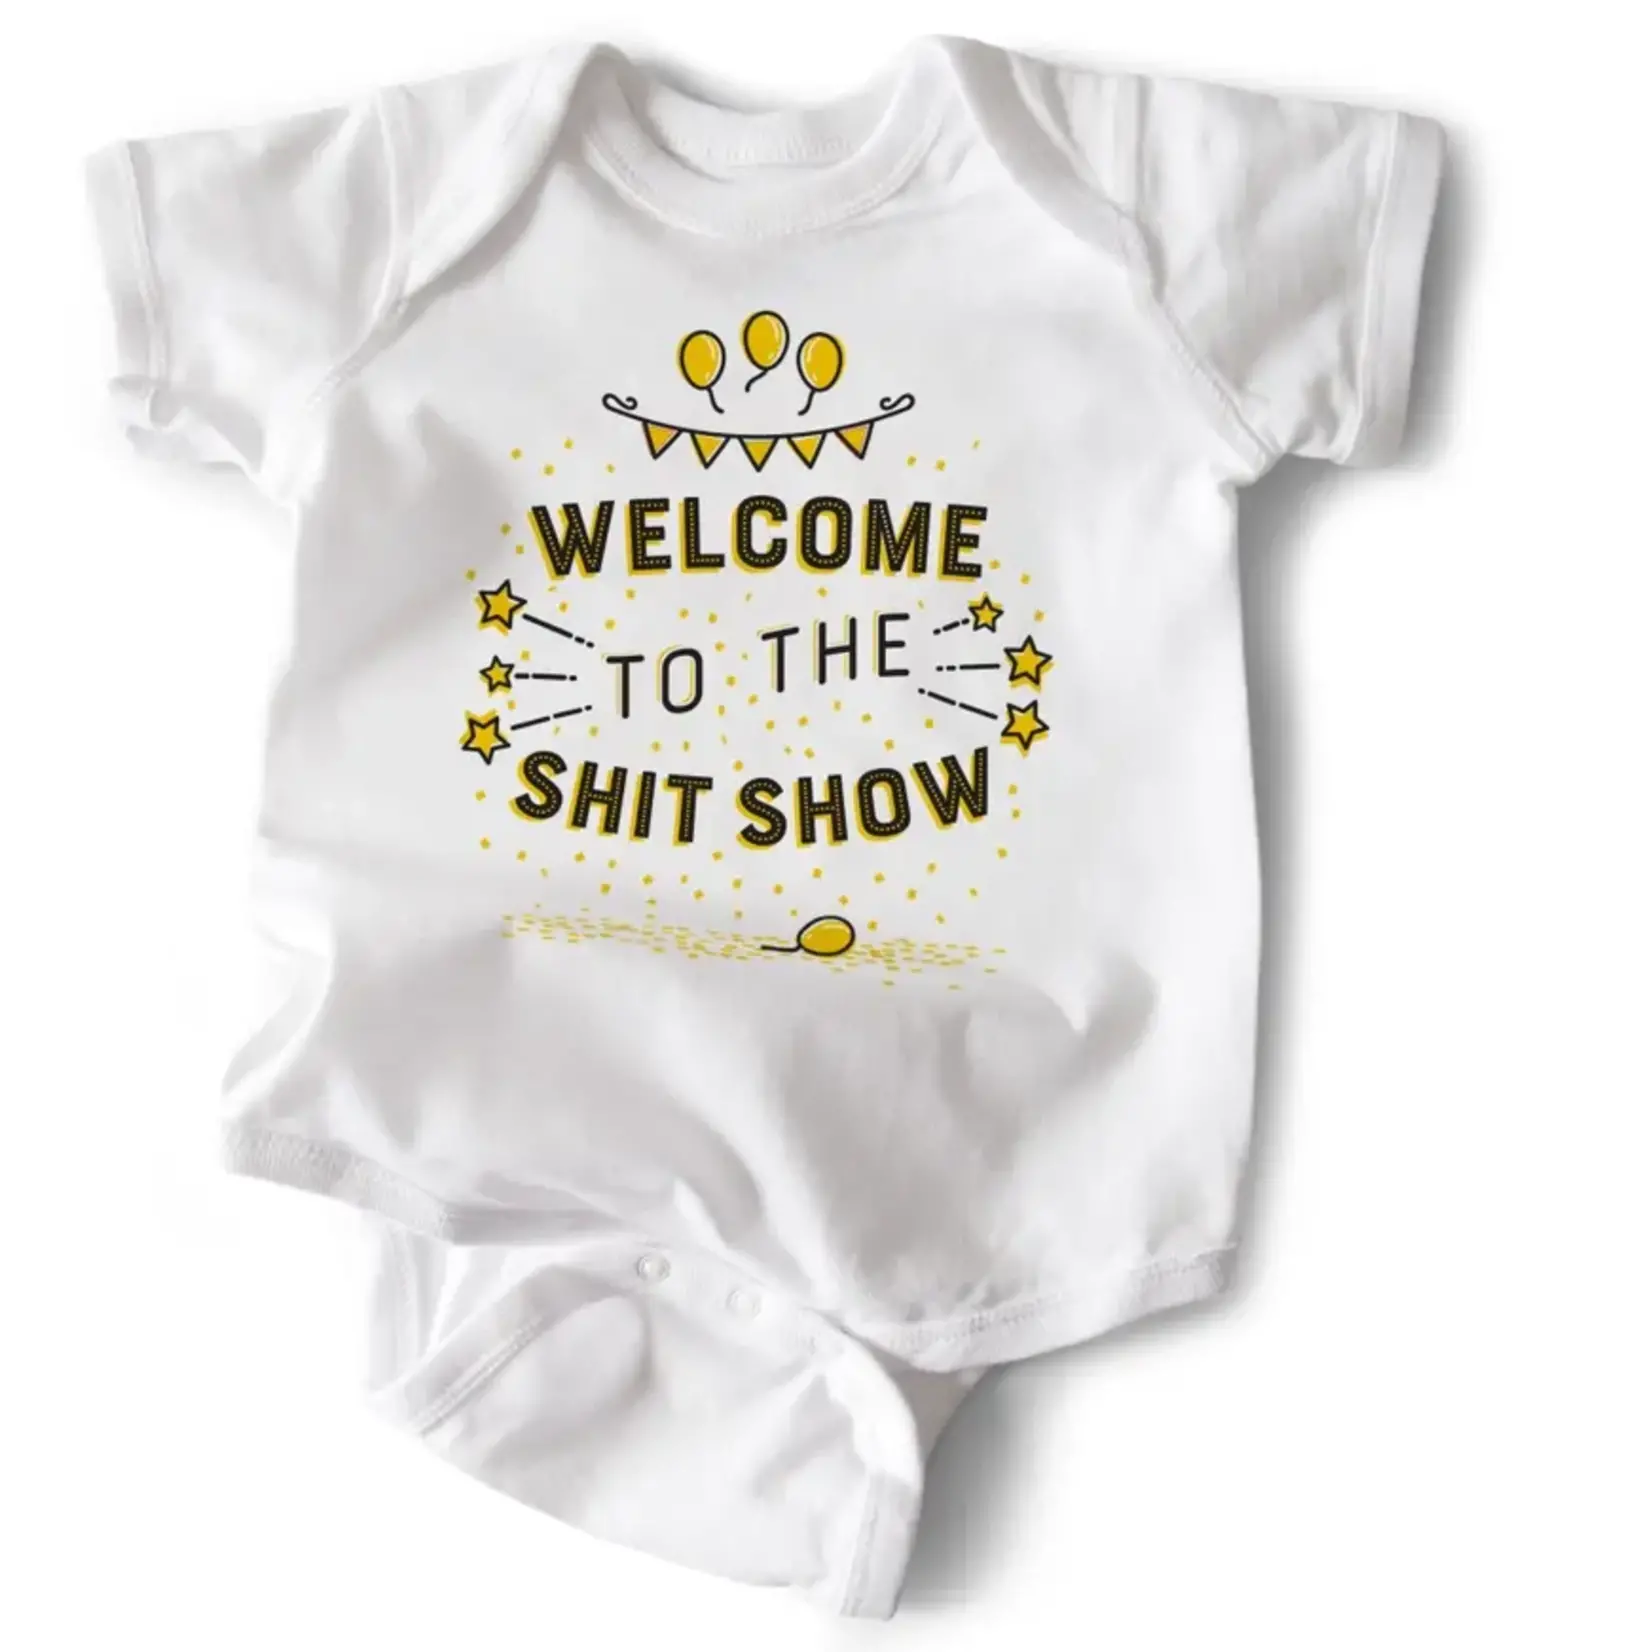 "Welcome to the Shit Show" Baby Onesie | 6-12 Months | White